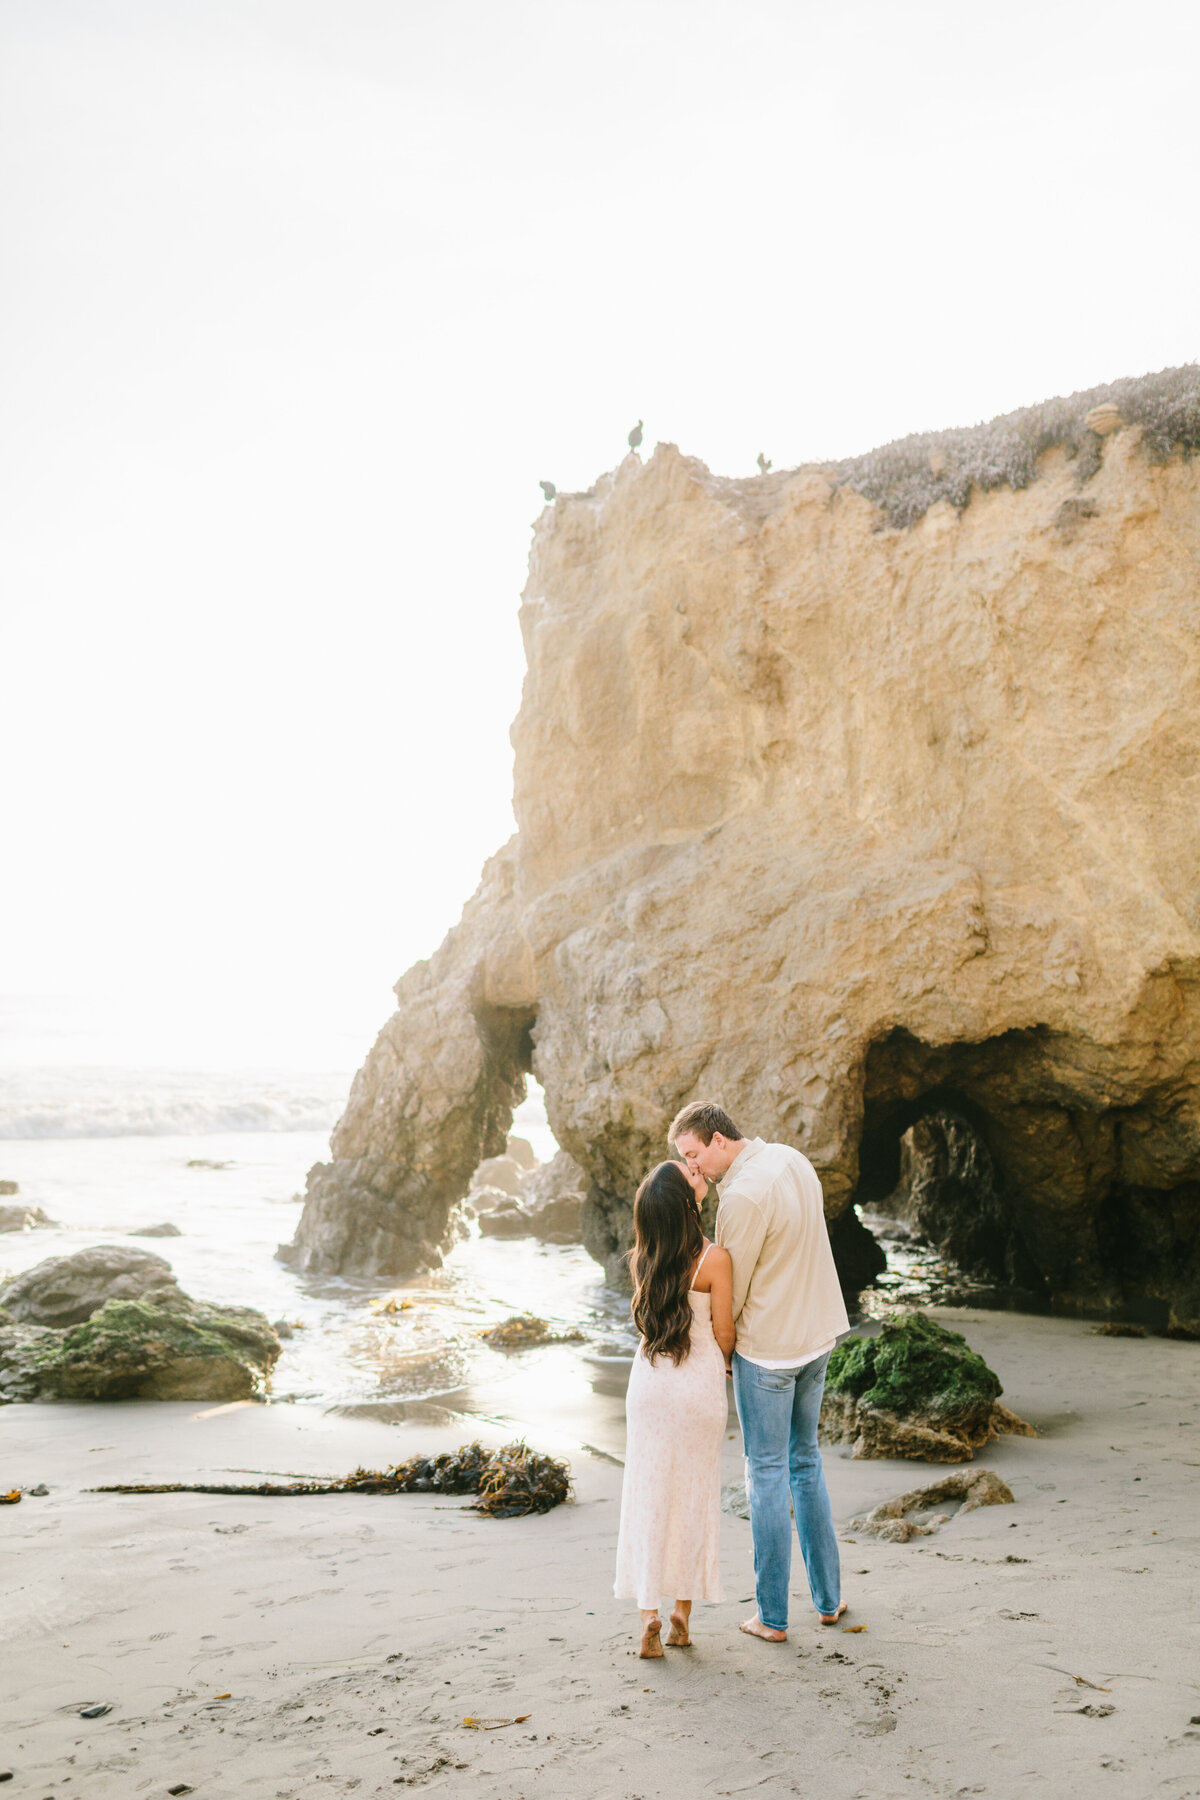 Best California and Texas Engagement Photographer-Jodee Debes Photography-269